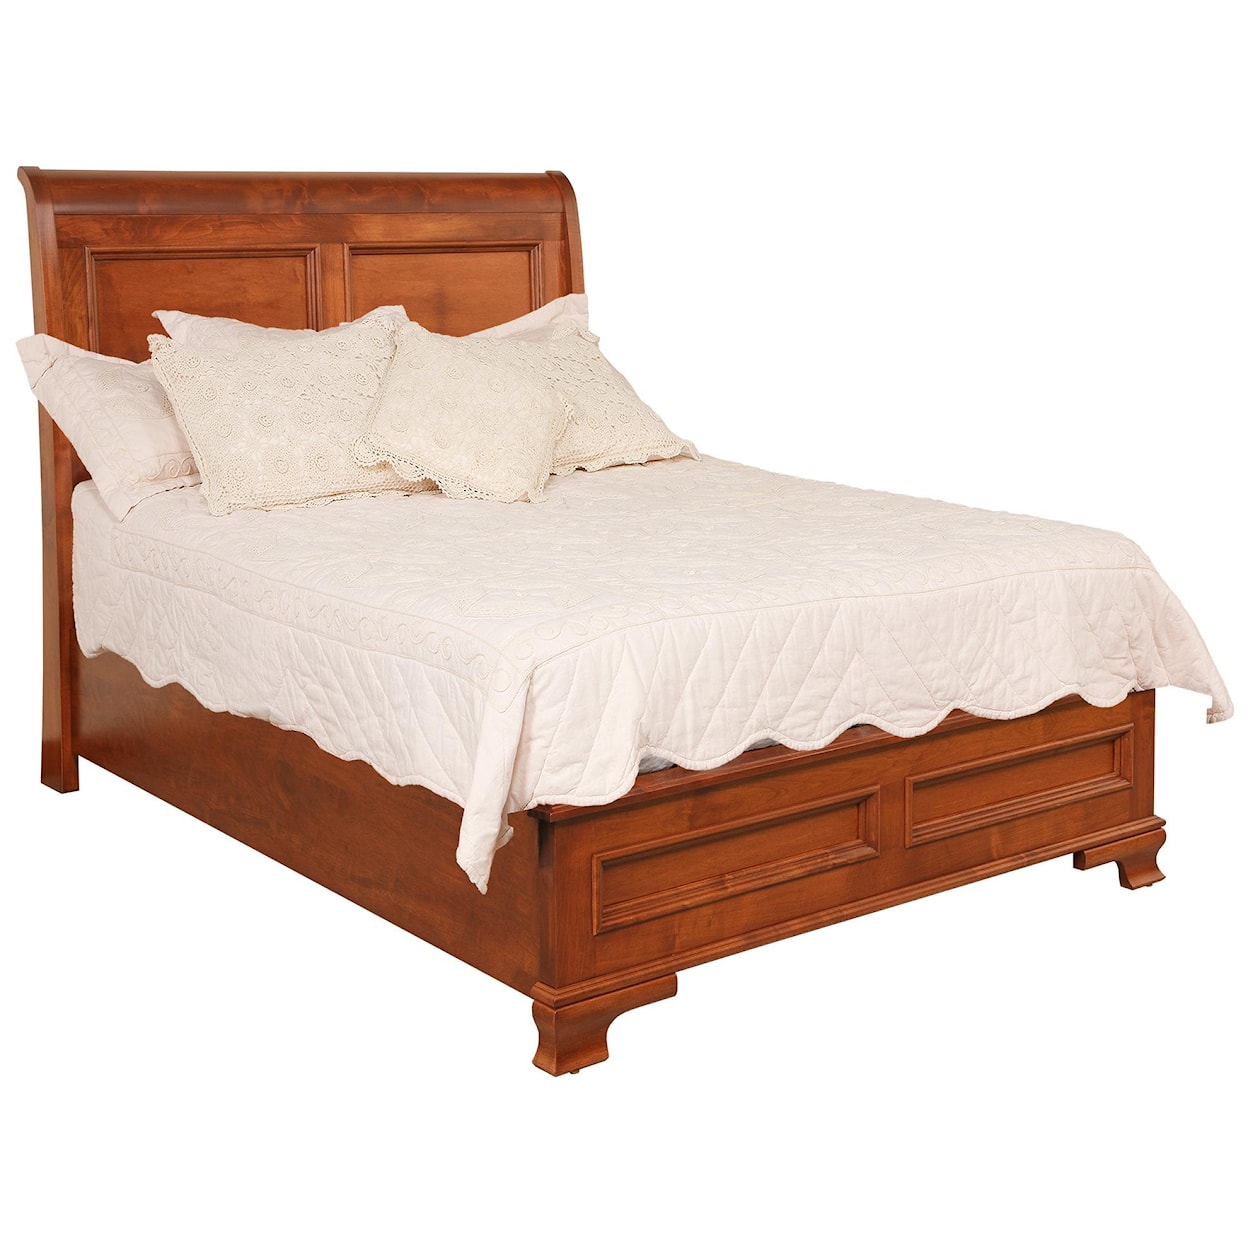 Daniel's Amish Classic Sleigh Bed with Low Footboard